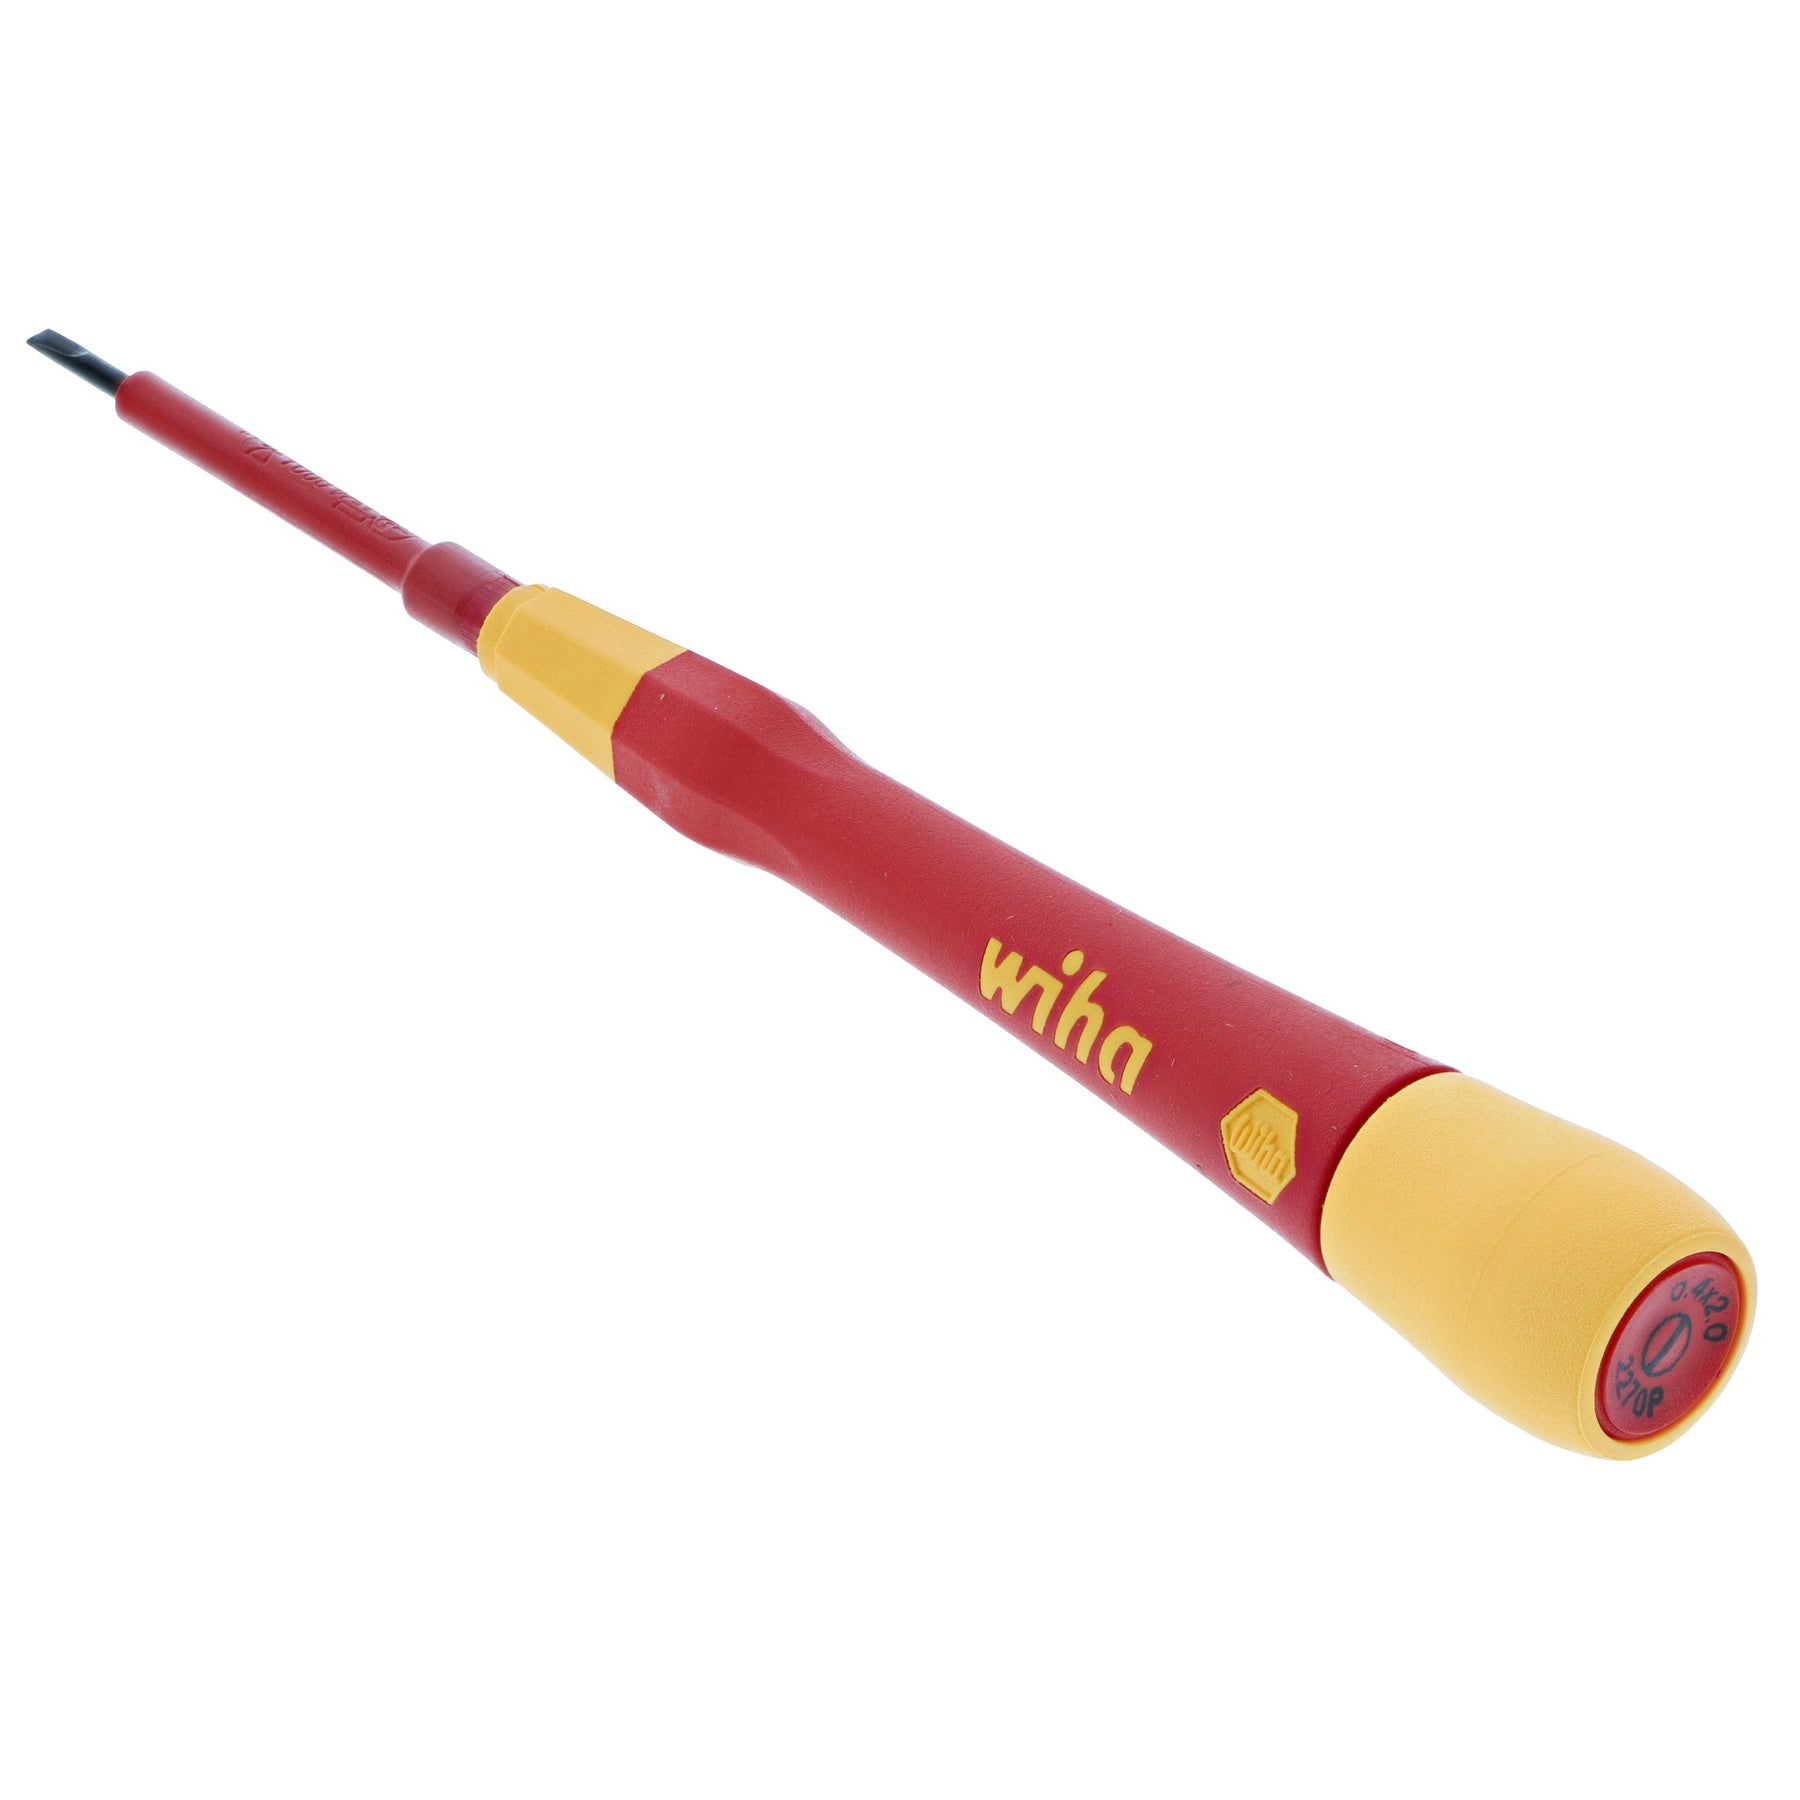 Insulated PicoFinish Precision Slotted Screwdriver 2.0mm x 40mm